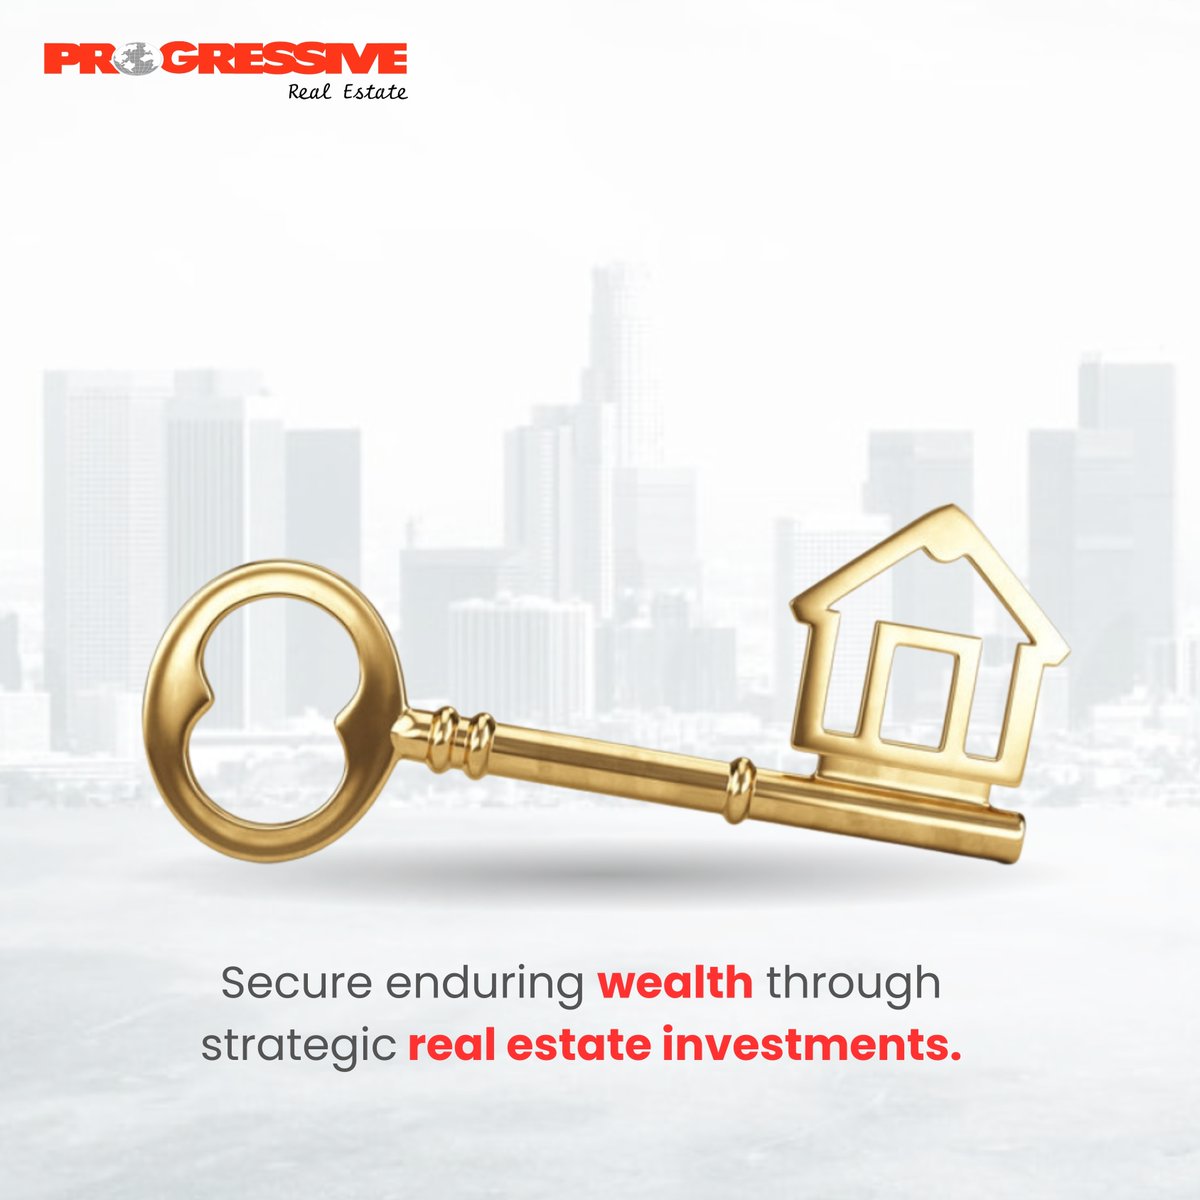 Unlock a world of opportunities: Invest globally, live locally. 🏢🏘
.
.
#realestate #dubai #america #europe #progressive #progressiverealestate #property #propertyinvestment #investment #internationalinvestment #realestate #realestateinvestment #MadhyaPradesh #bhopalrealestate